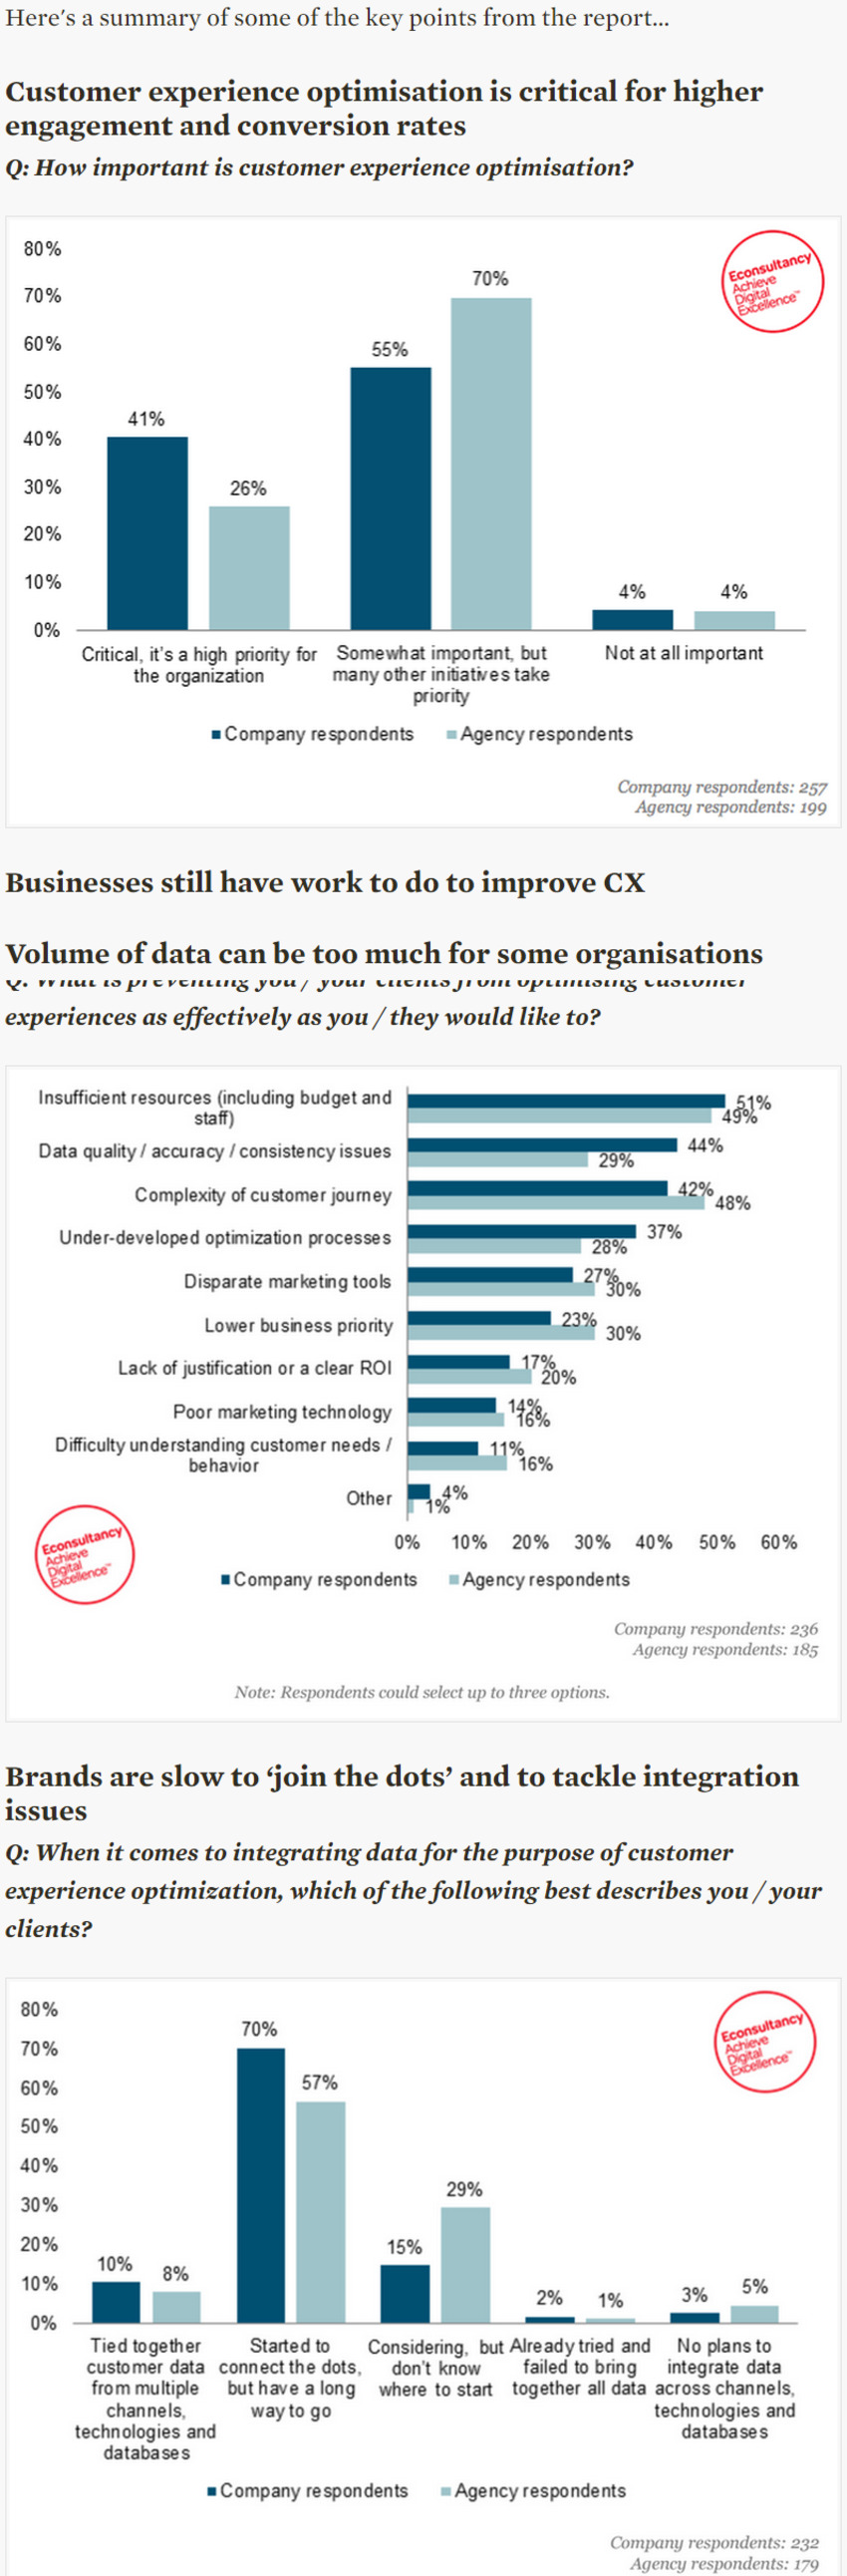 Five key trends from our Customer Experience Optimisation report - Econsultancy | The MarTech Digest | Scoop.it